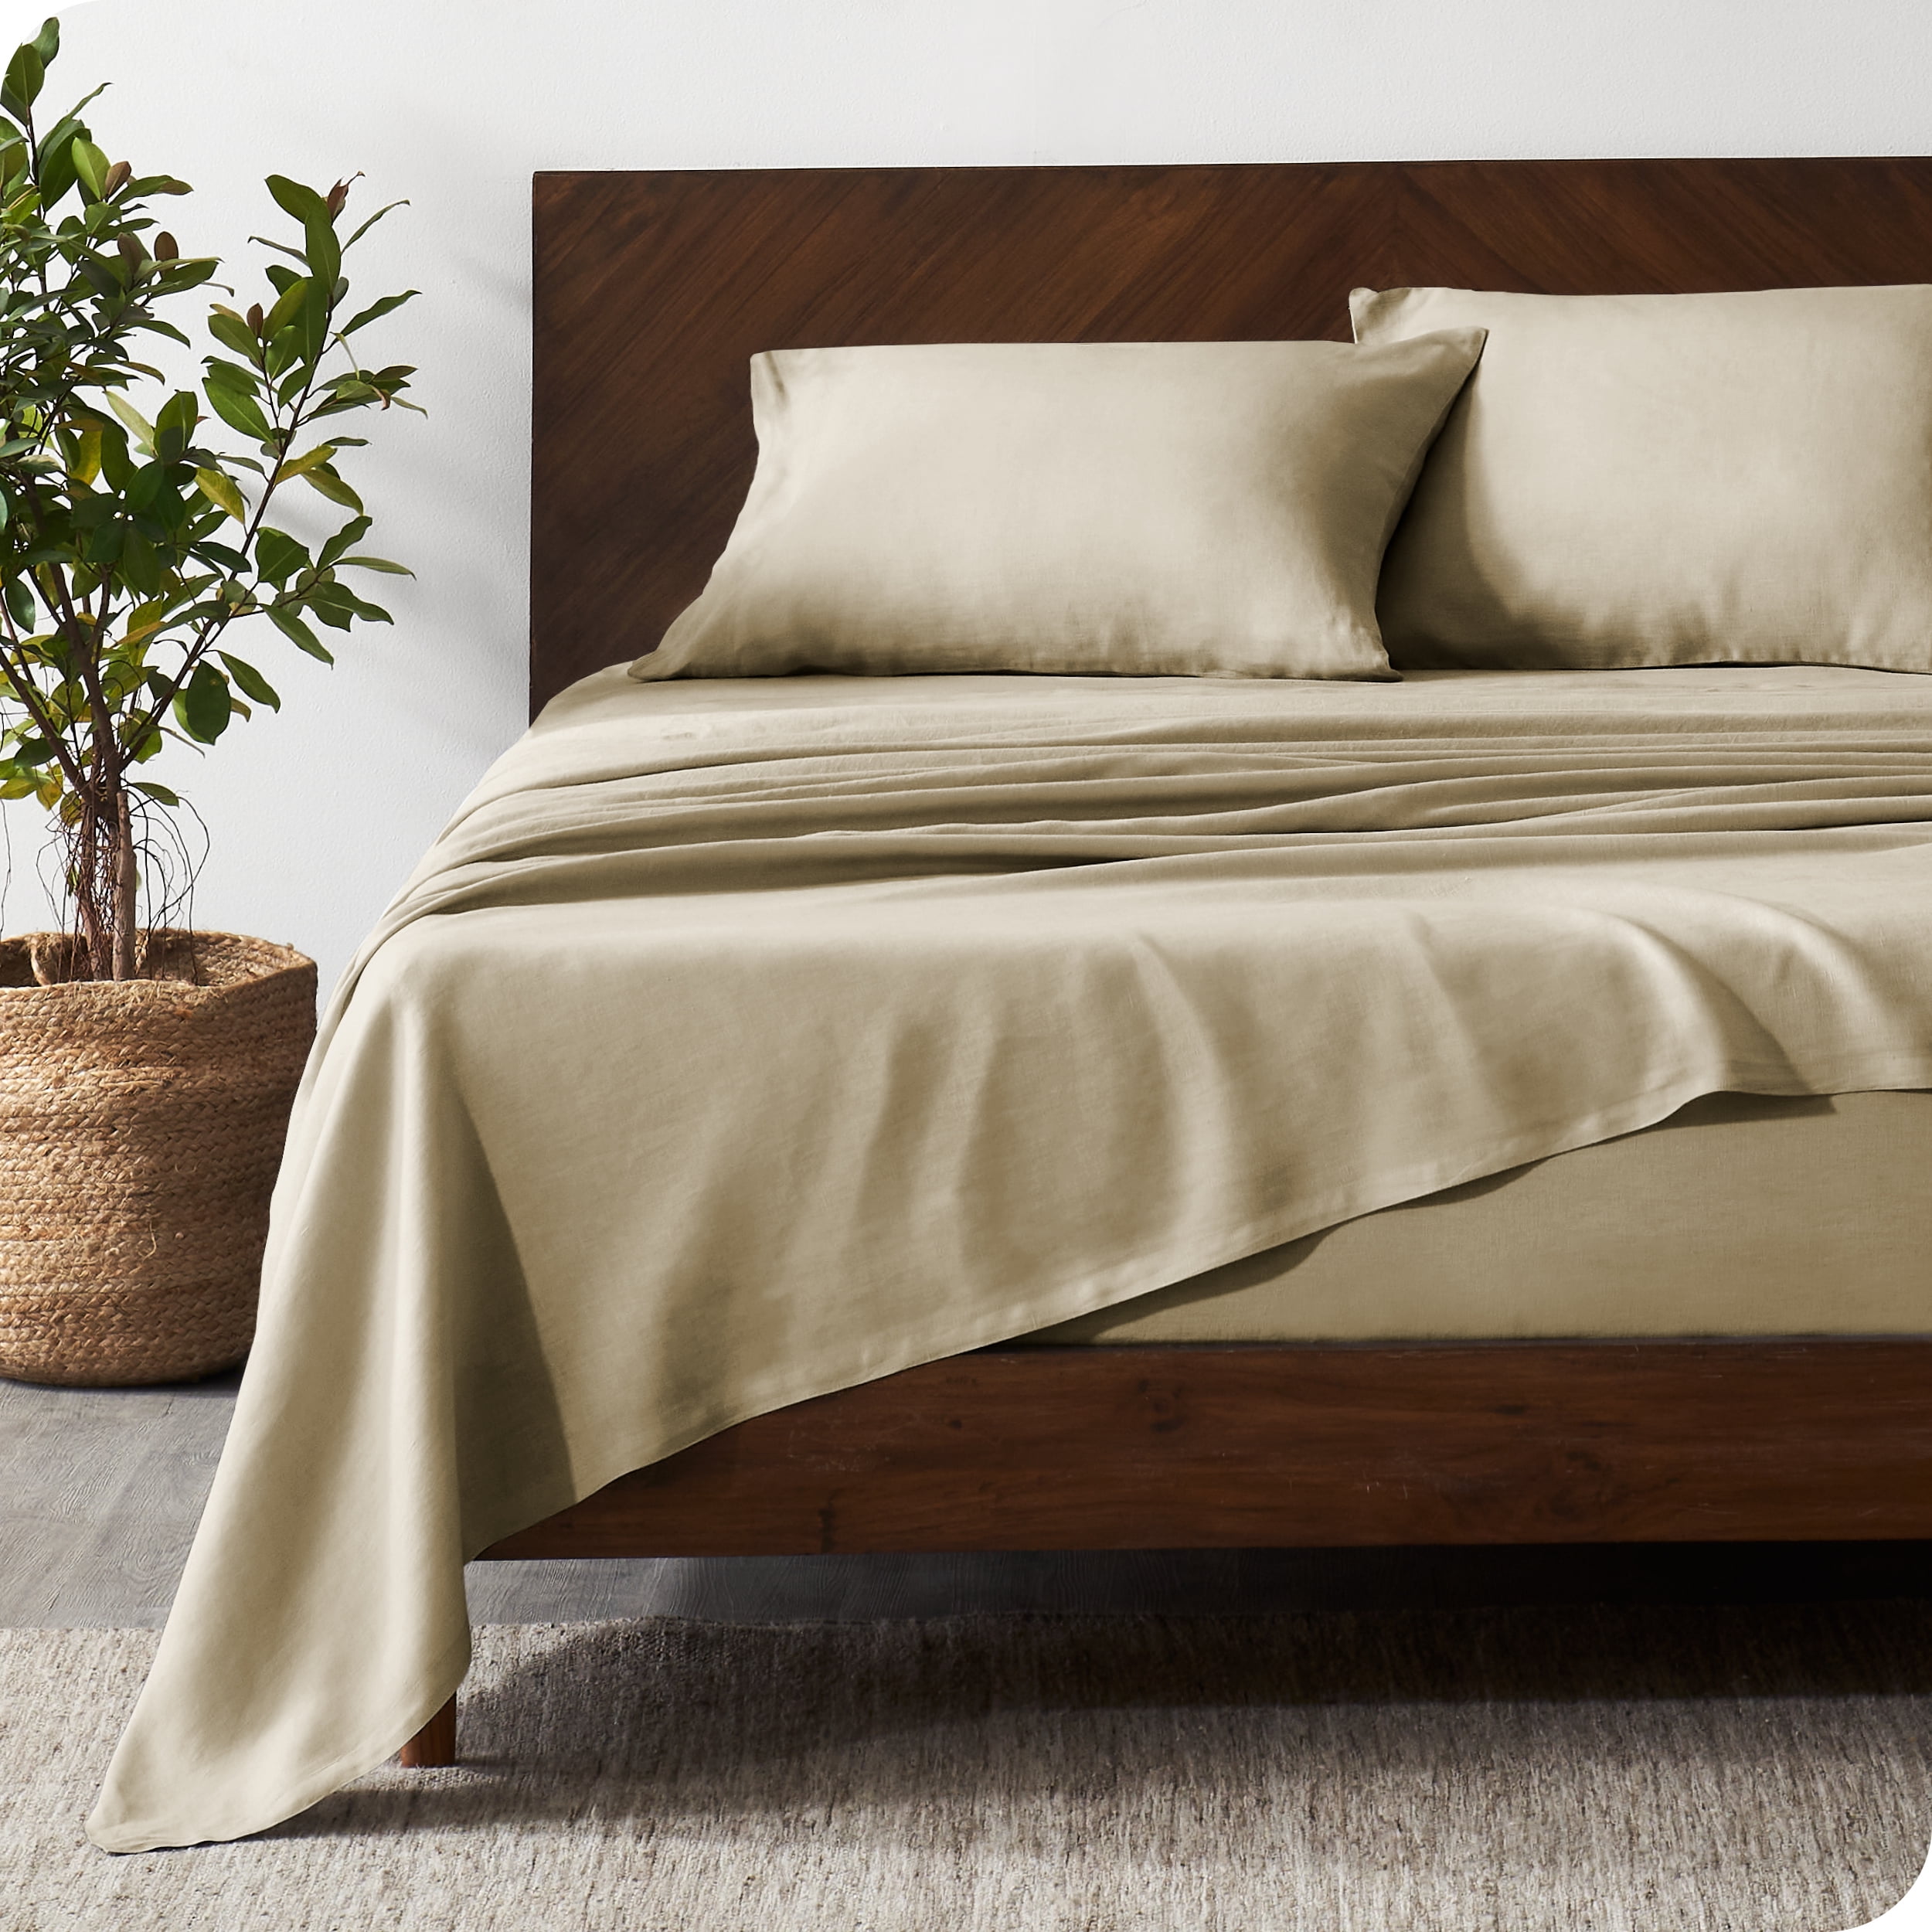 EveryDay Linens Gold Plain Solid Twin XL Size Size Five Piece [5] Bed Sheet Set (Deep Pocket) with Three [3] Pillow Cases. 600 Thread Count 並行輸入